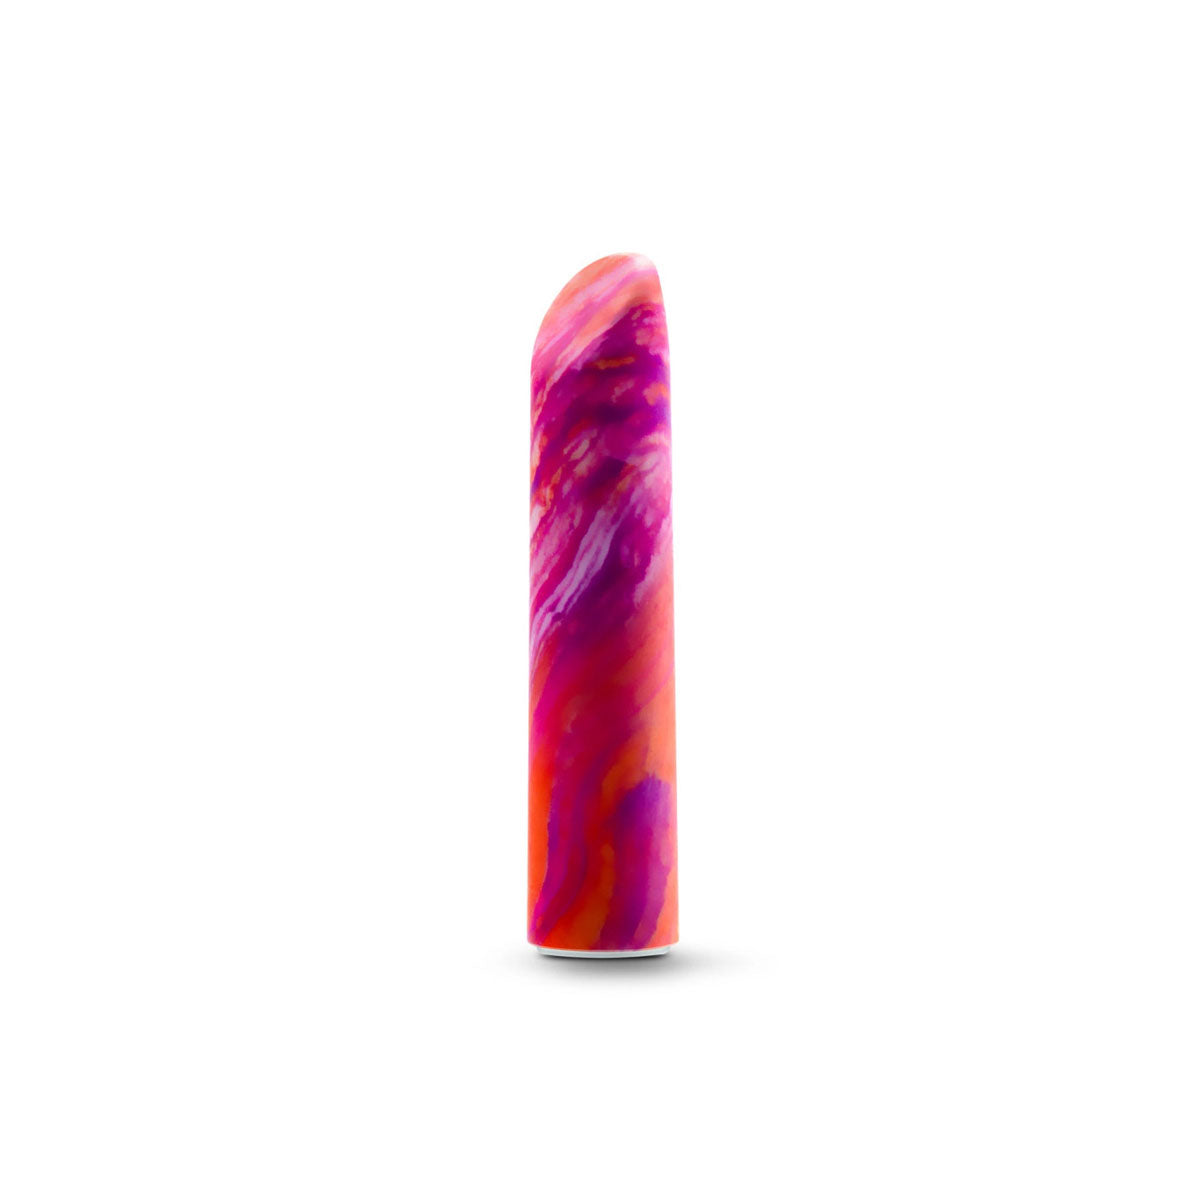 Marbled purple and orange silicone power bullet vibrator for clitoris stimulation Nudie Co